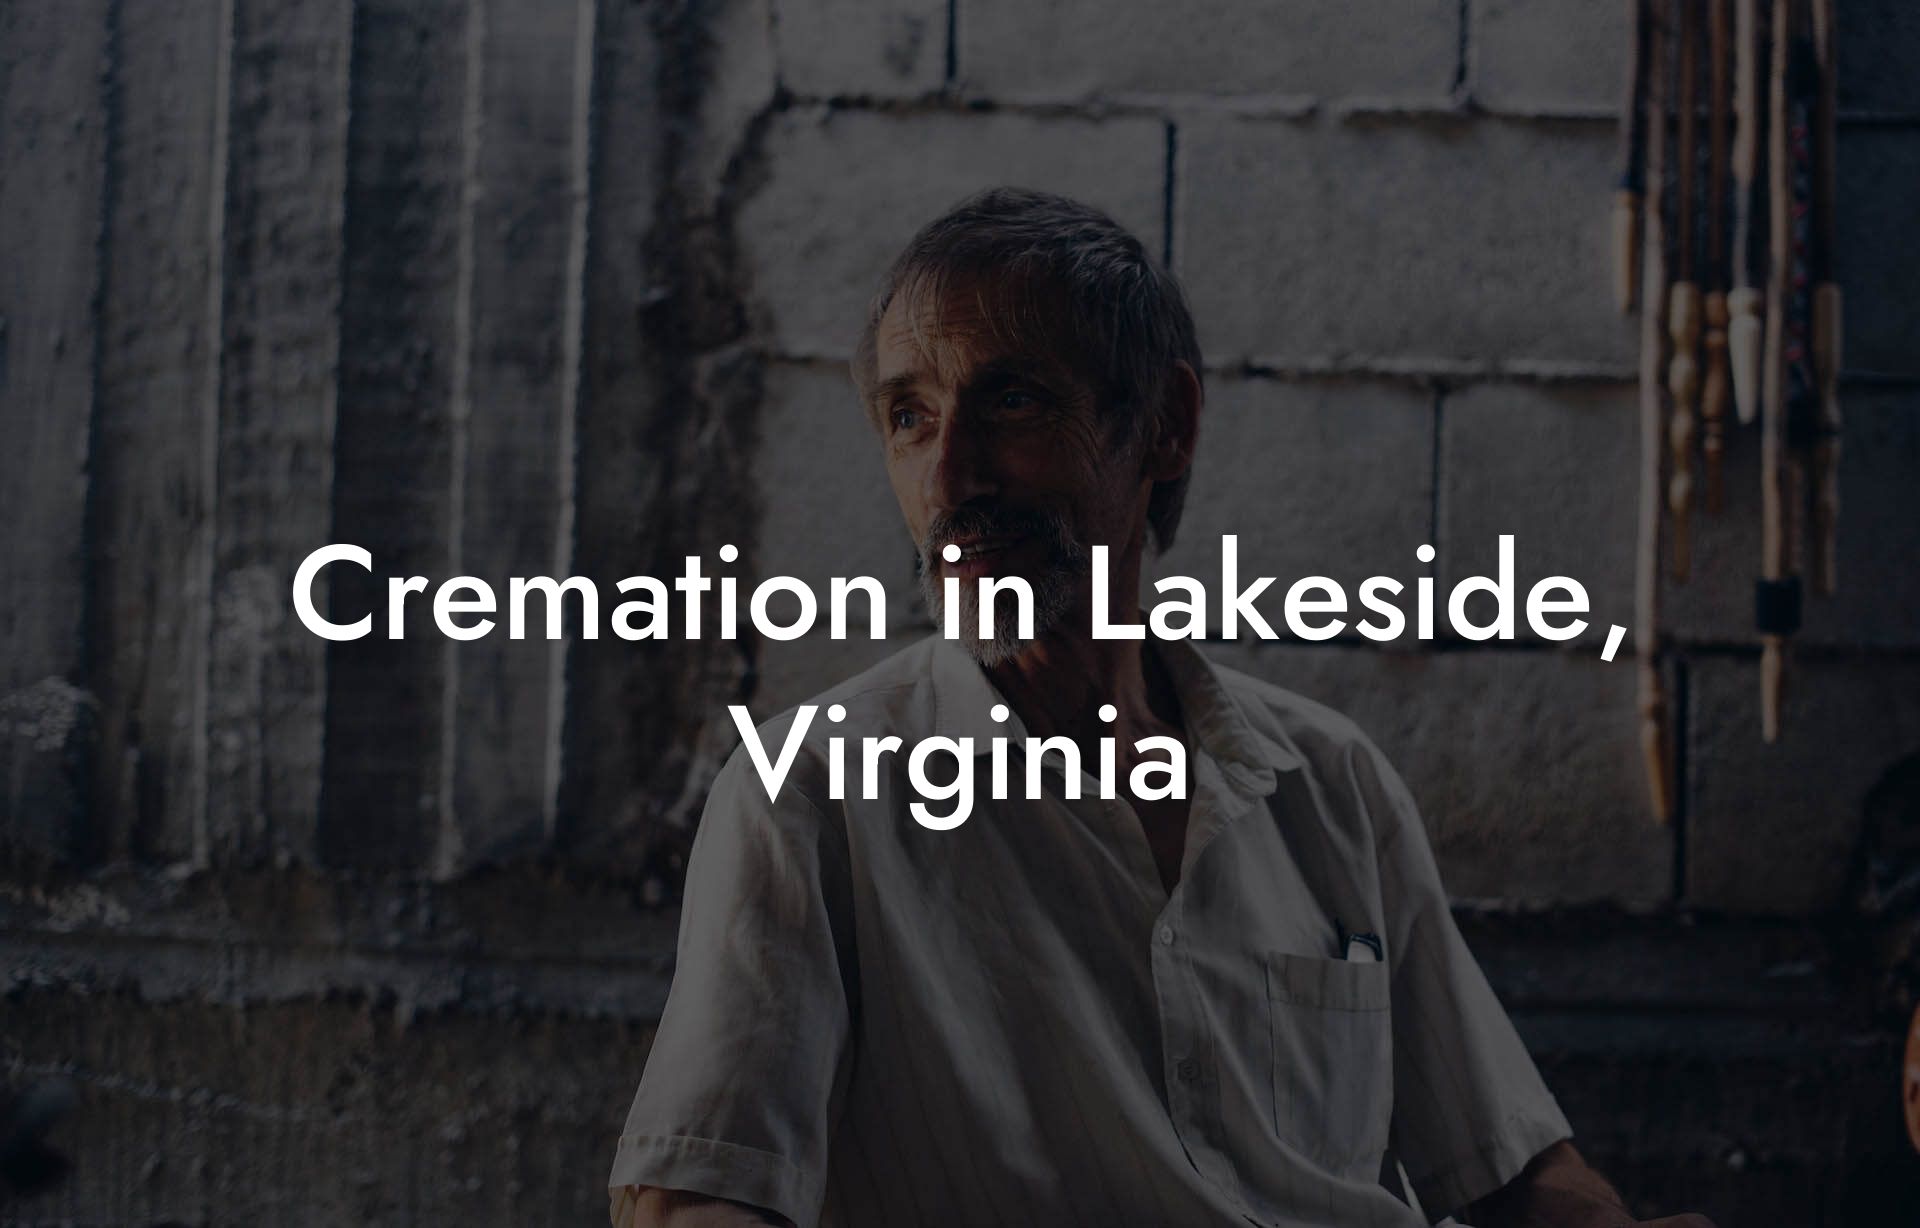 Cremation in Lakeside, Virginia